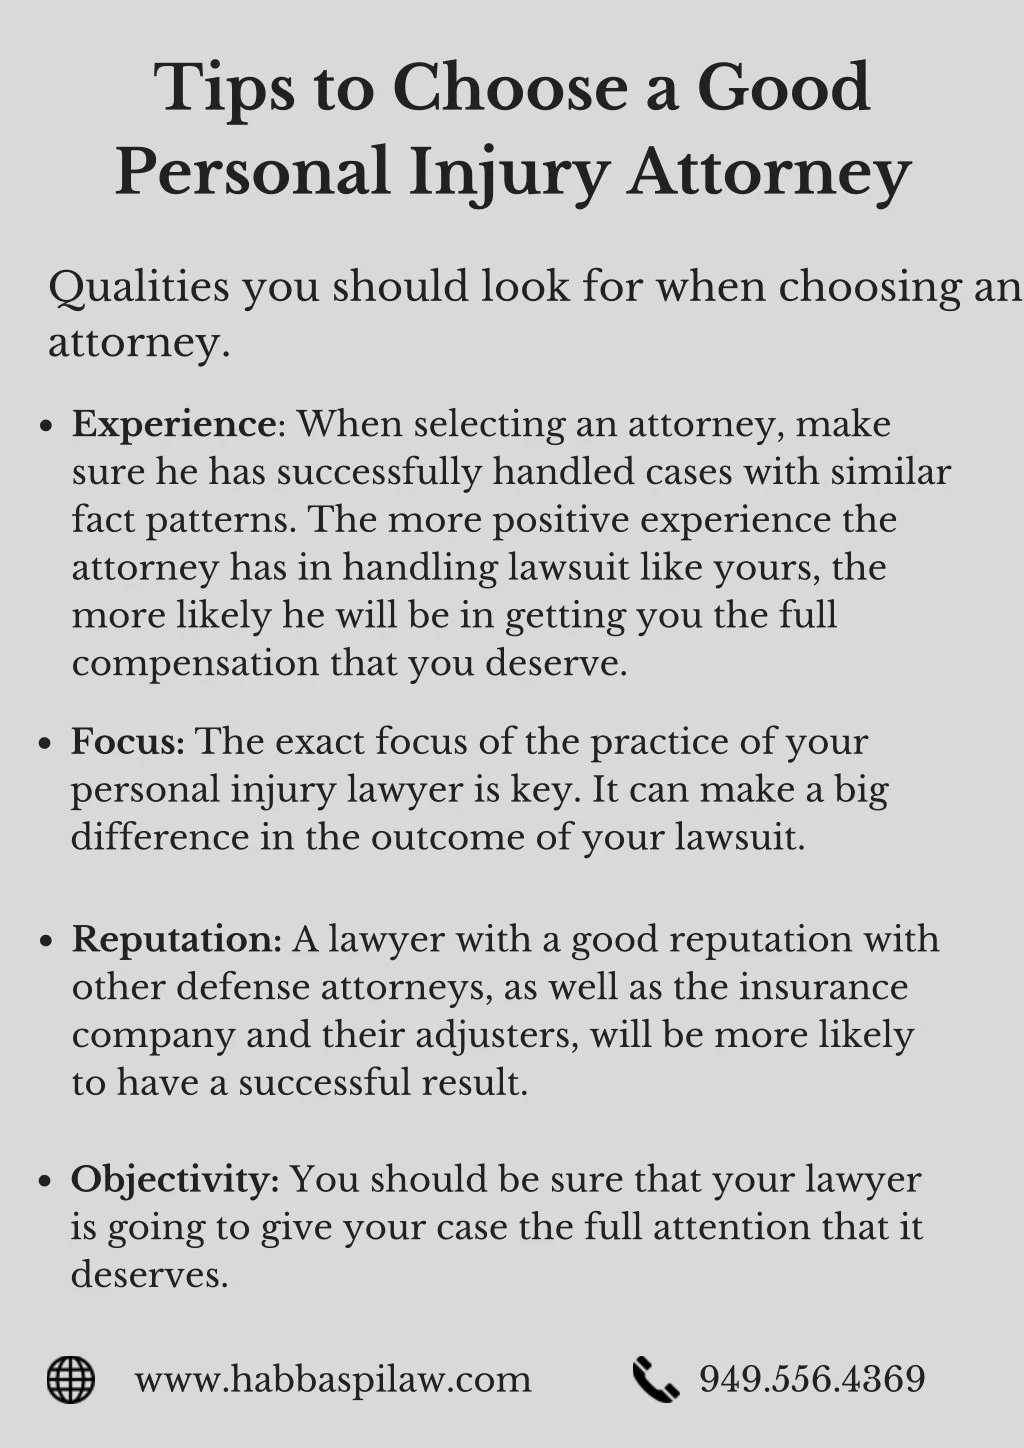 tips to choose a good personal injury attorney